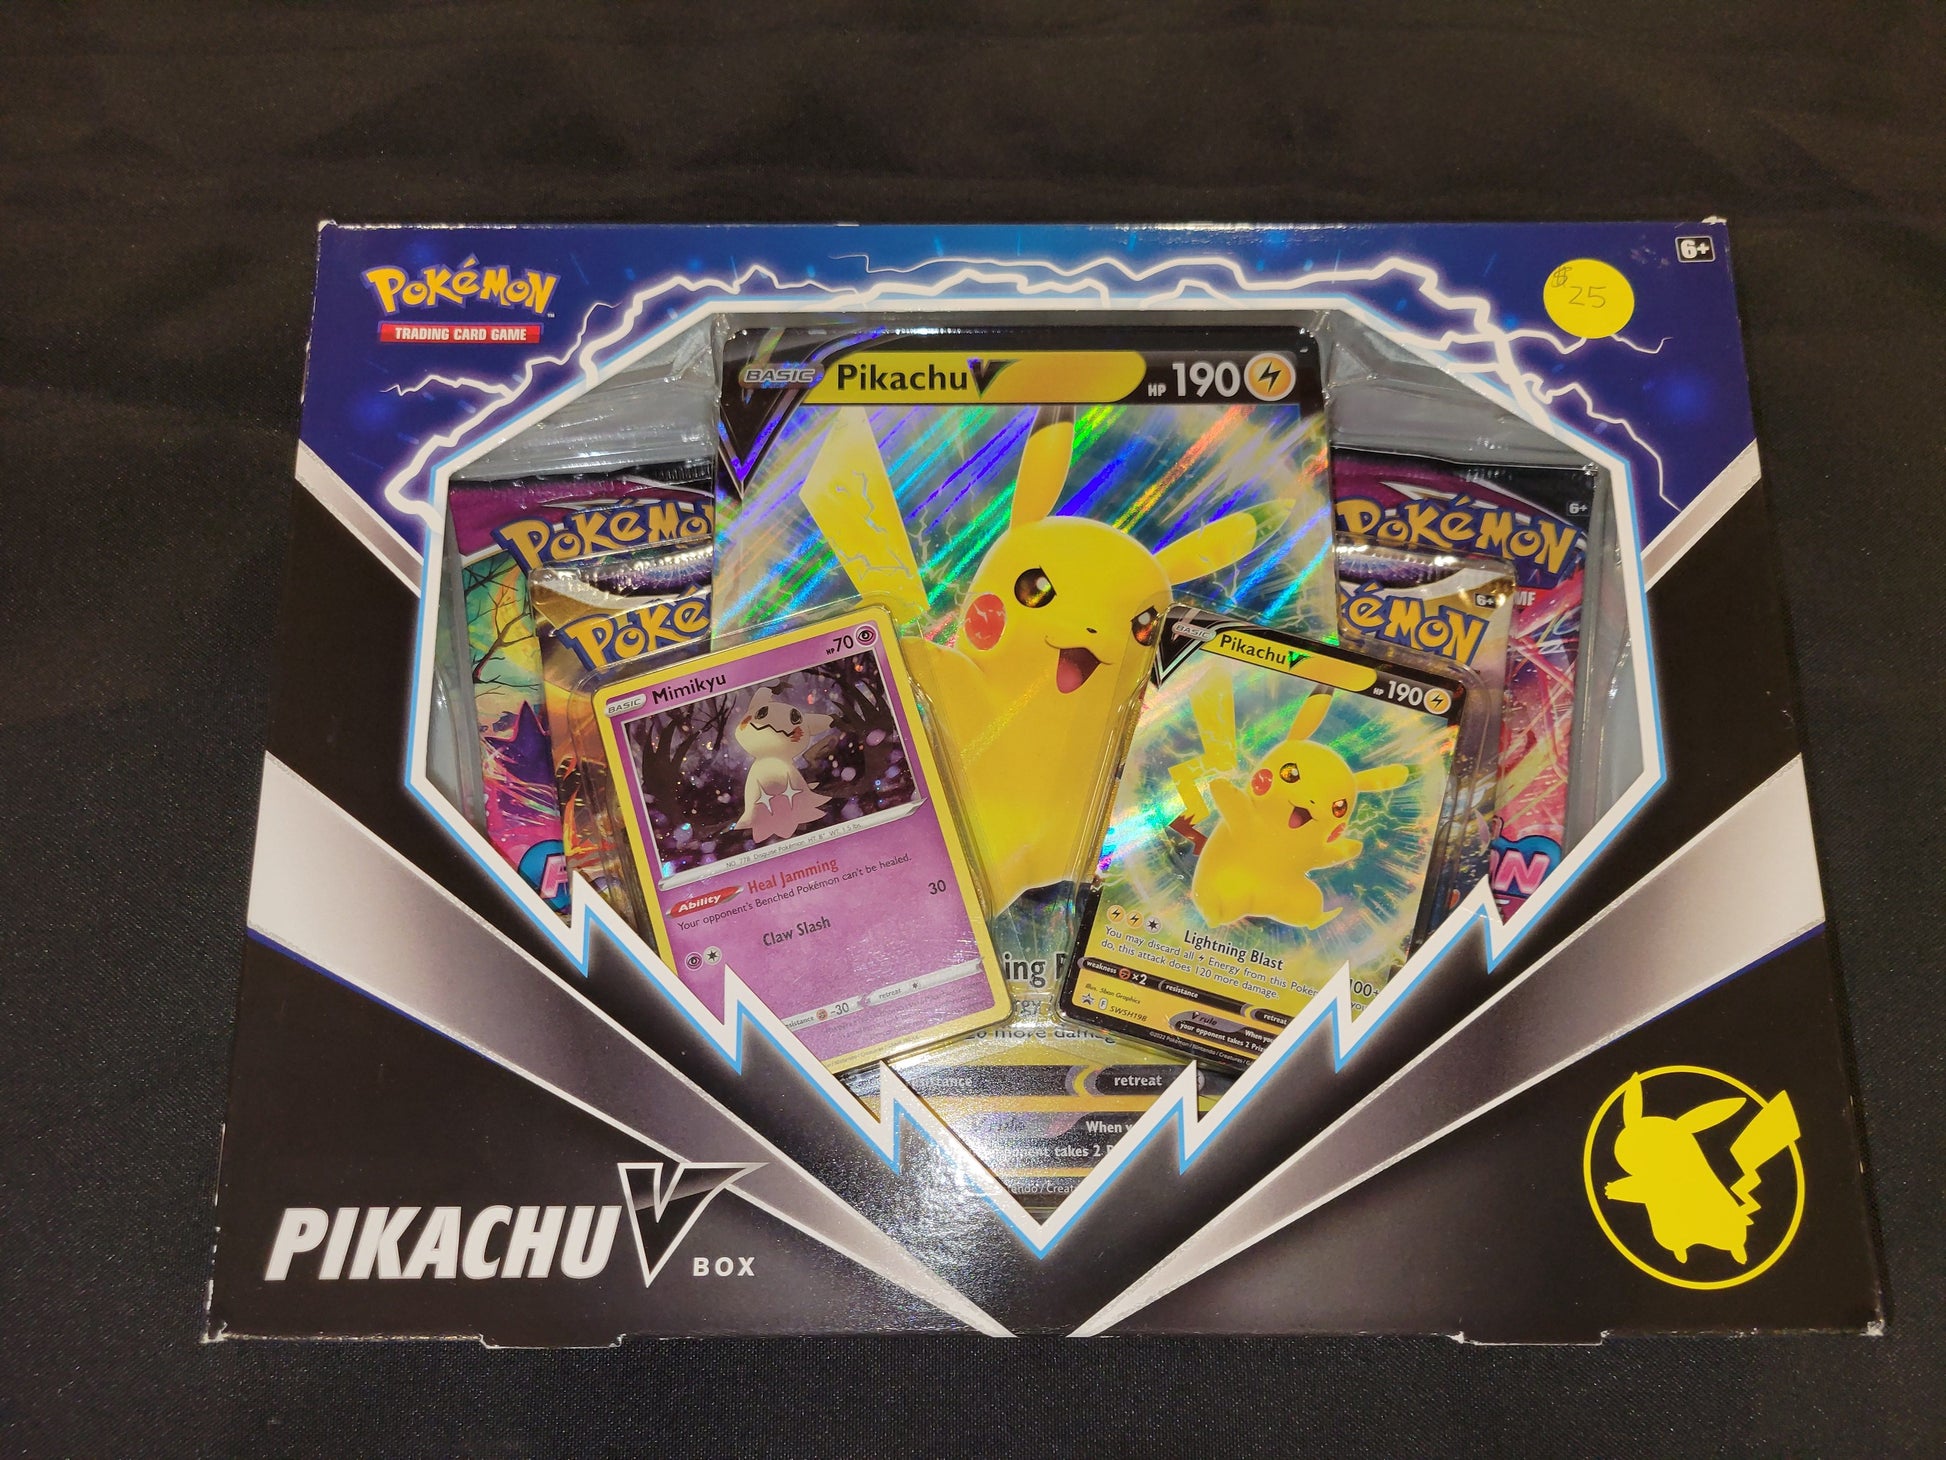 Each Pikachu V box comes with one oversized PikachuV card, one holofoil Pikachu card, one online code card and four tcg packs.